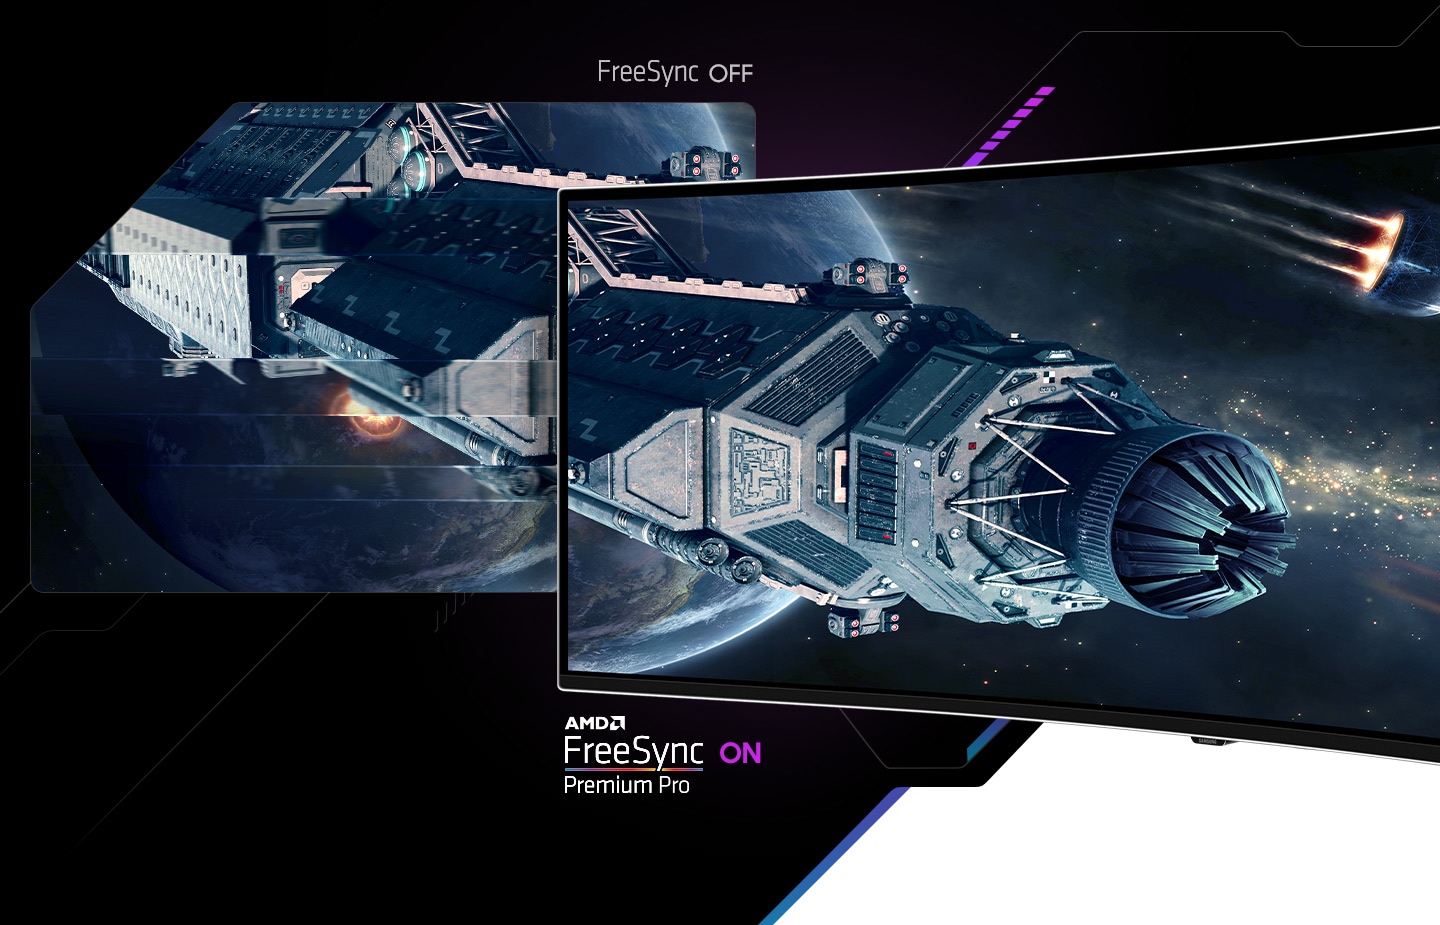 A space docking station is shown in front of a planet on two screens. The spacecraft on the left screen is blurred with the text “FreeSync OFF” underneath, and the right is sharp and clear with the text “AMD FreeSync Premium Pro ON” underneath.